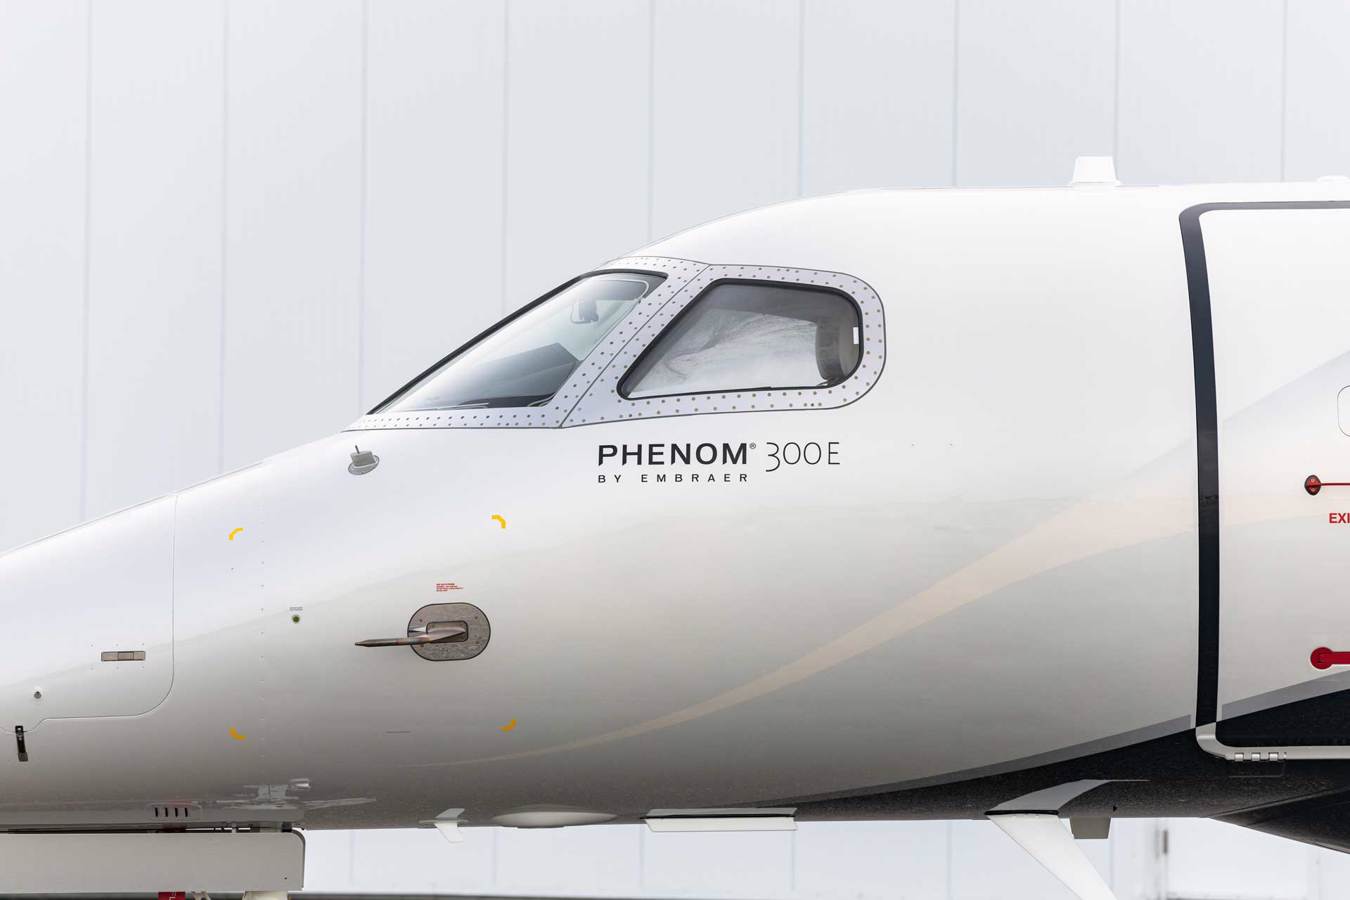 Phenom jets by Embraer.